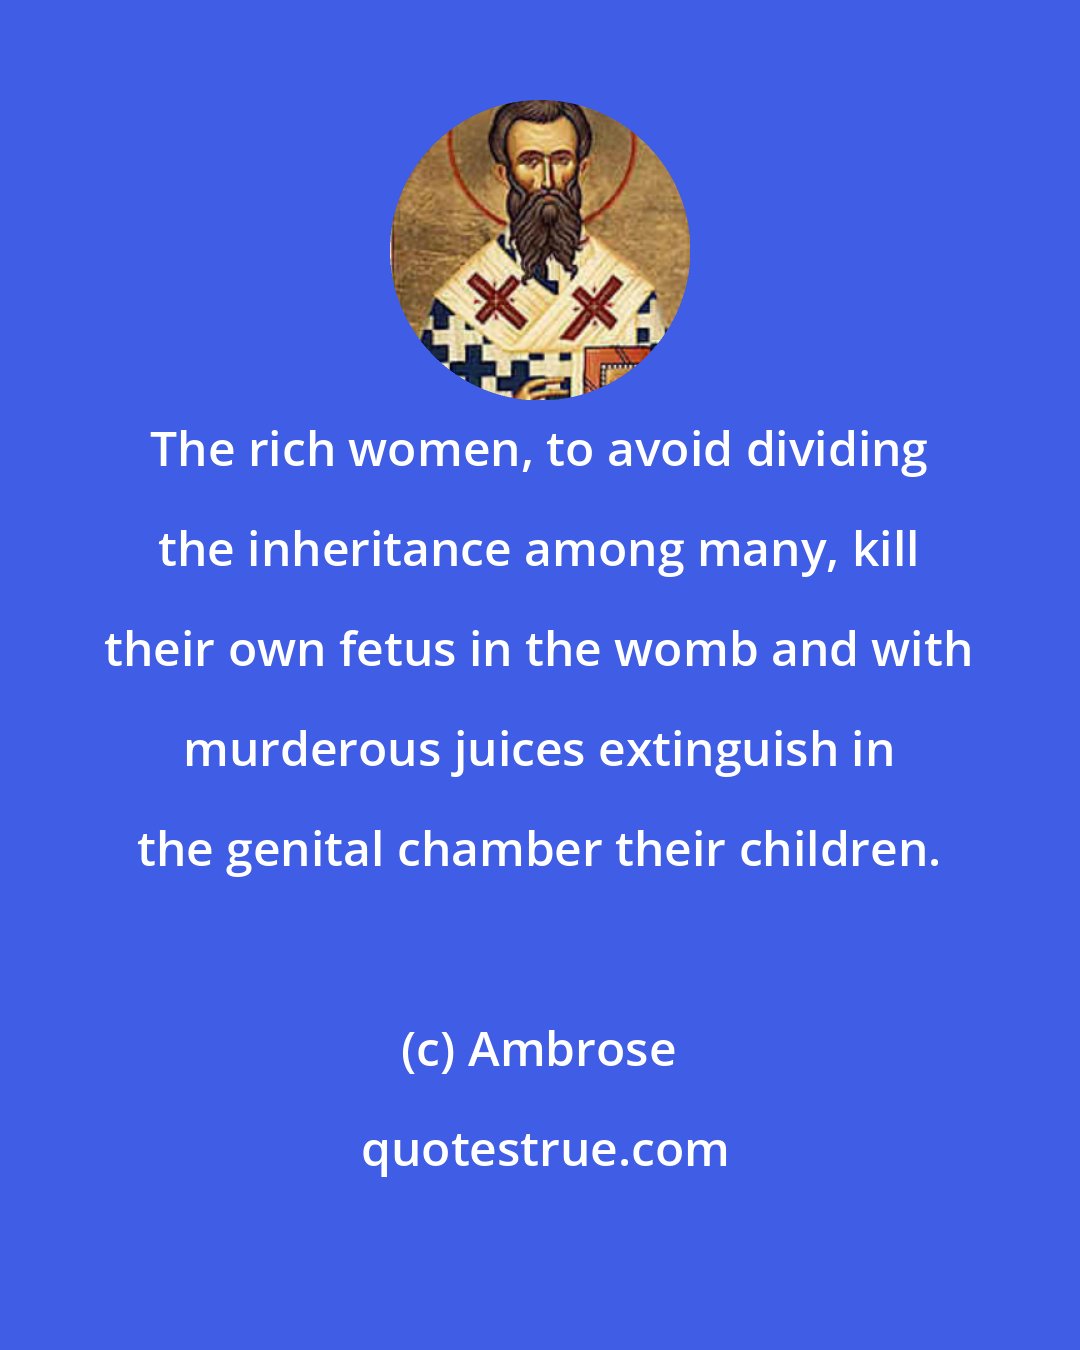 Ambrose: The rich women, to avoid dividing the inheritance among many, kill their own fetus in the womb and with murderous juices extinguish in the genital chamber their children.